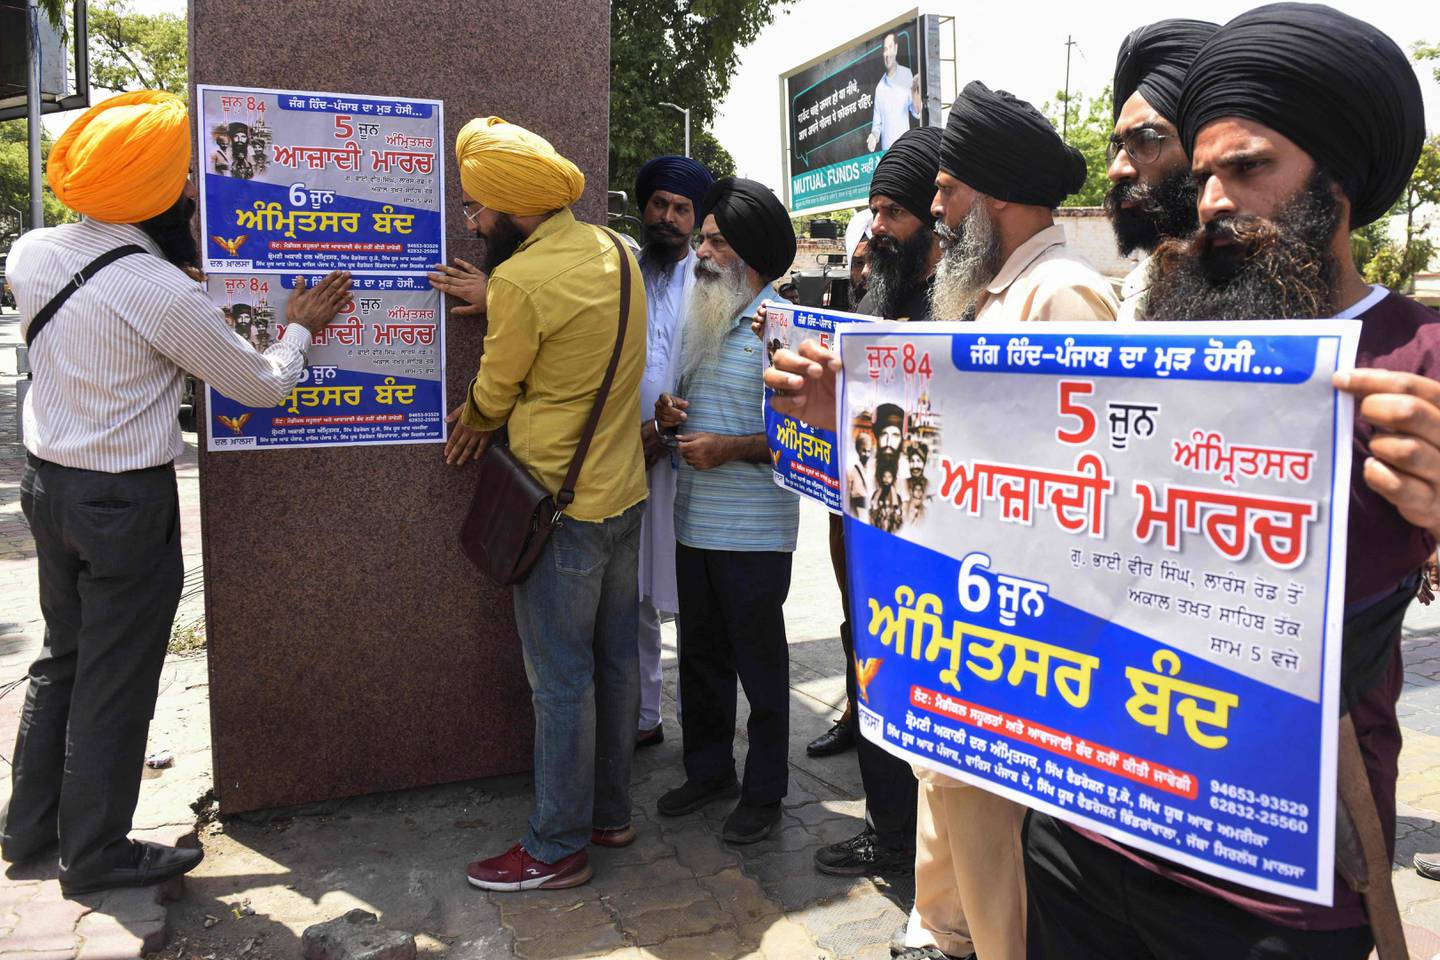 Activists of the Dal Khalsa Sikh organisation paste posters demanding a curfew from the authorities ahead of the 38th anniversary of the Operation Blue Star, in which Indian military on June 1984 assaulted the Golden Temple in Amritsar to flush out militants, in Amritsar on June 2, 2022.  (AFP)